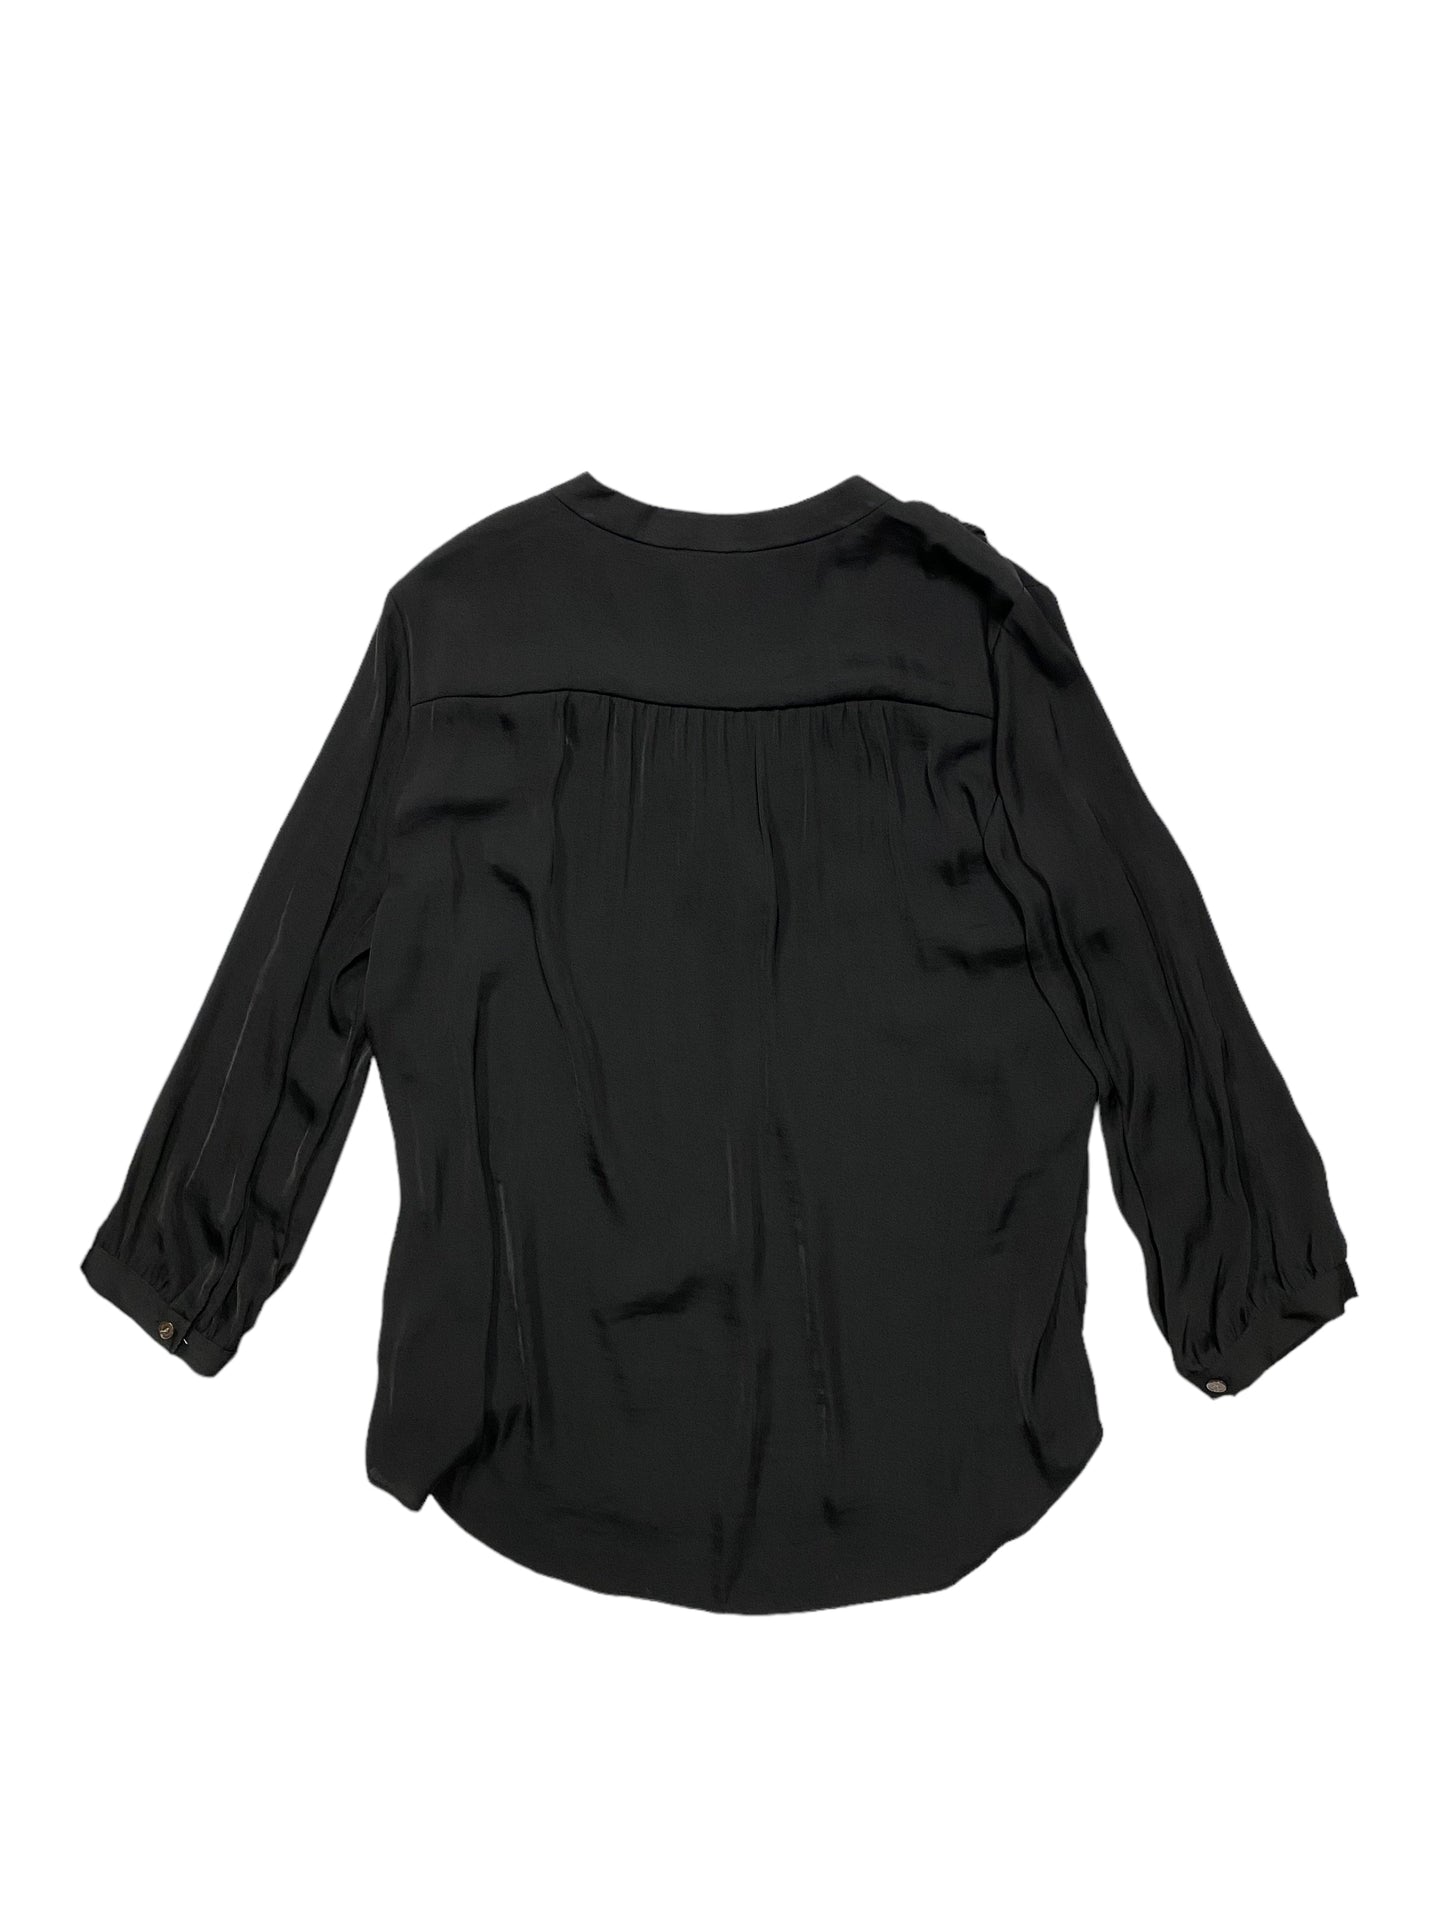 Black Top Long Sleeve Vince Camuto, Size M